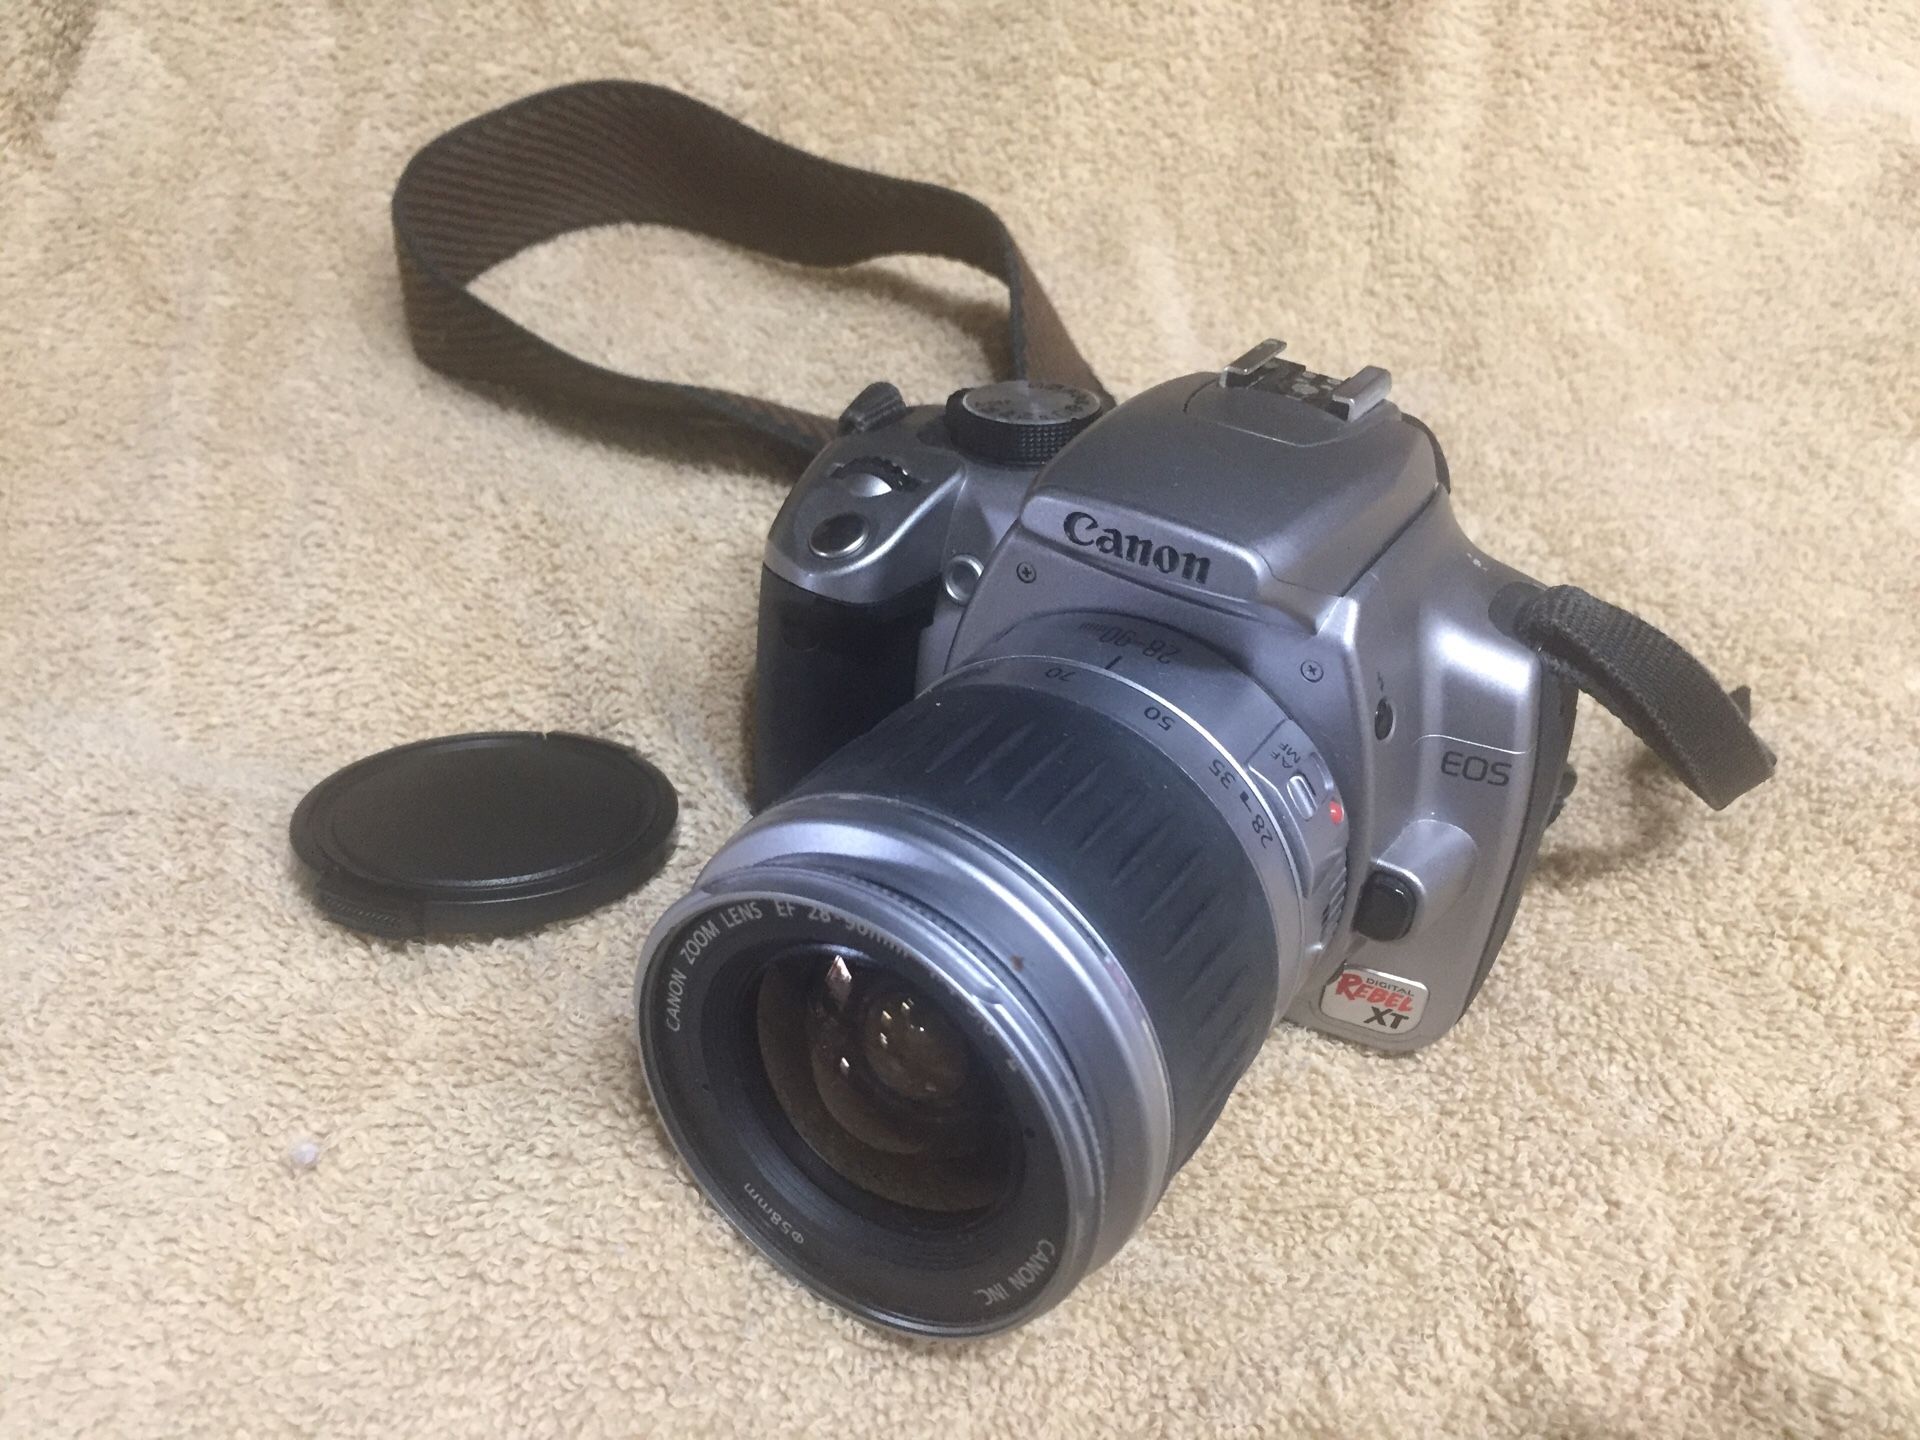 Canon EOS Rebel XT 8 mp digital camera with 28-90 Zoom lens